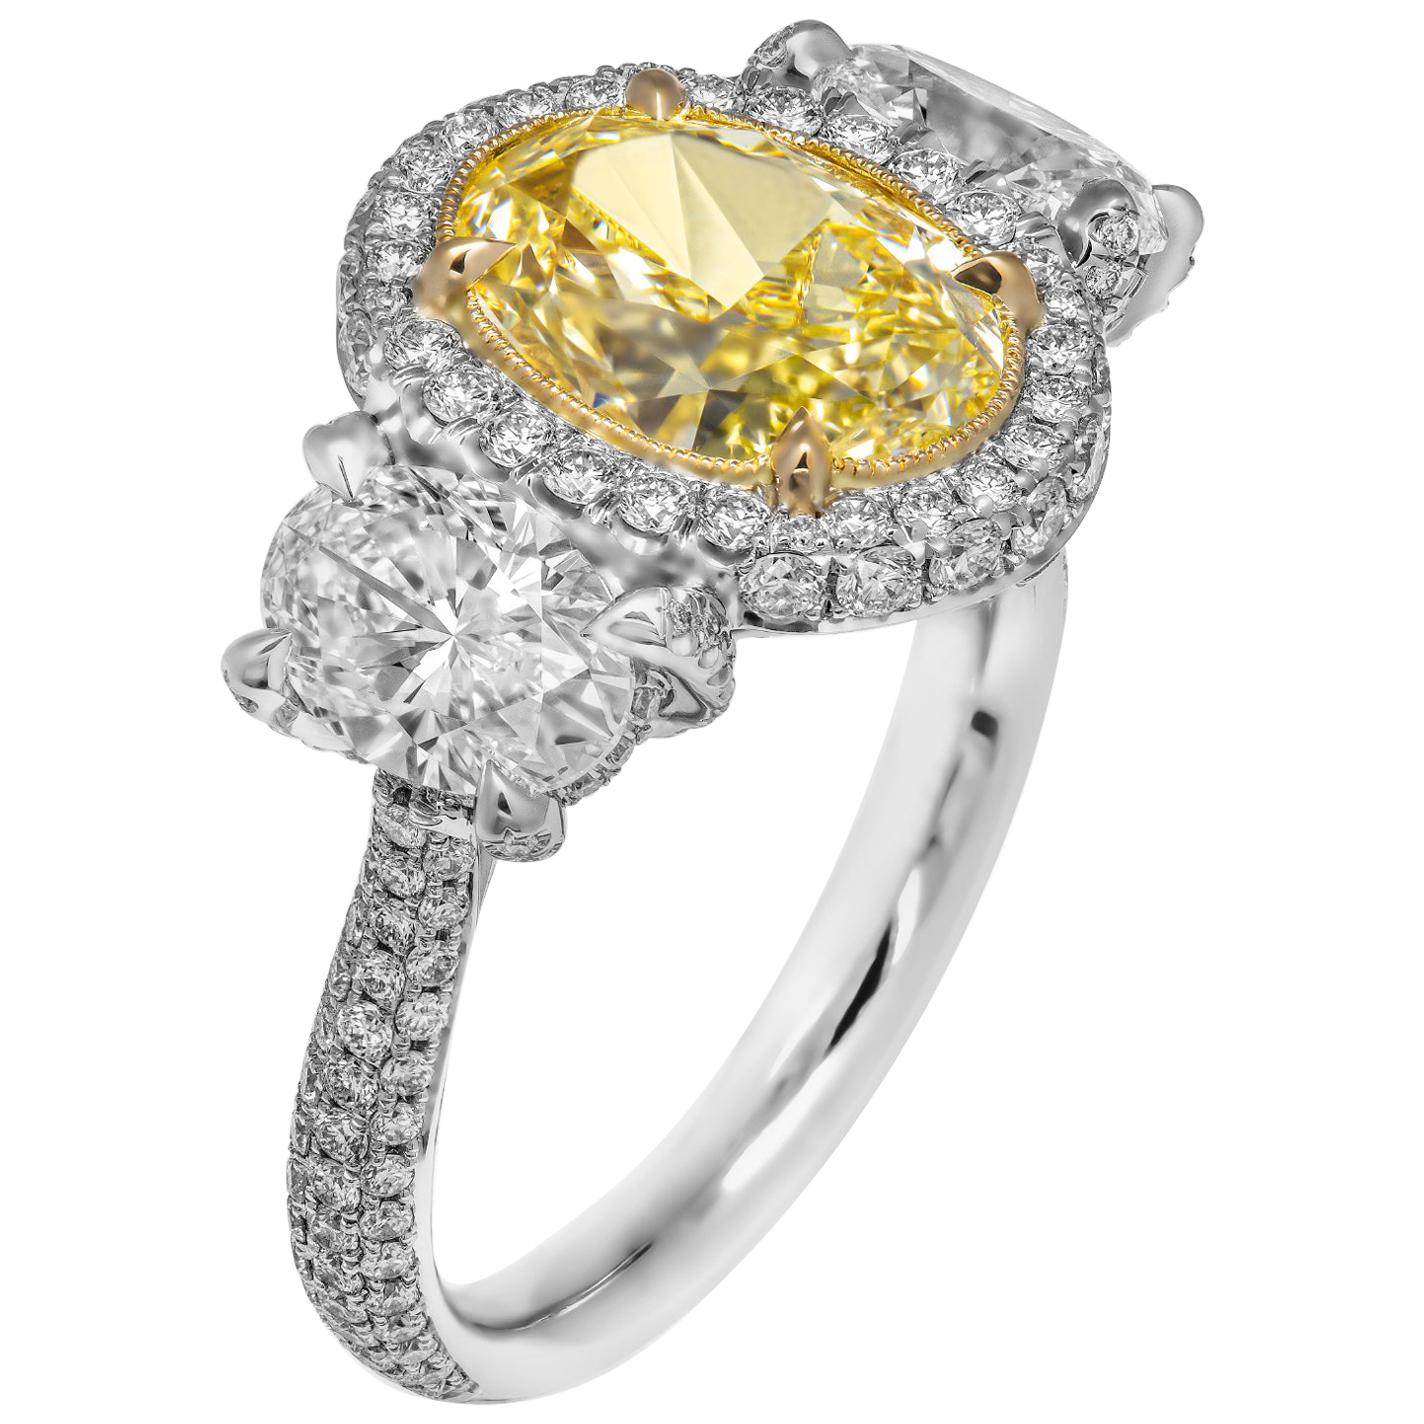 GIA Certifies 3-Stone Ring with 3.52 Carat Fancy Light Yellow Oval Diamond For Sale